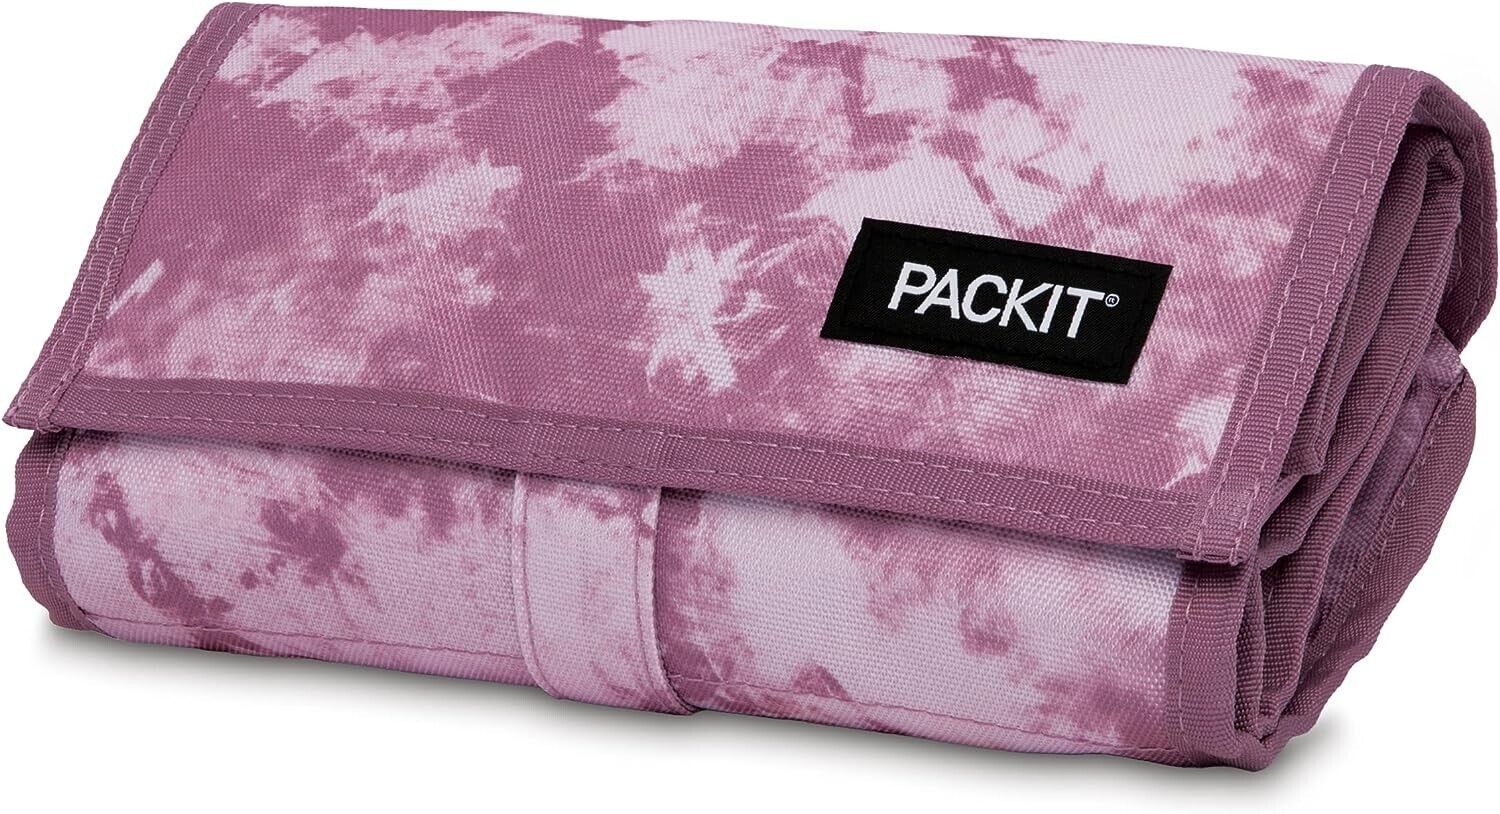 Packit Freezable Lunch Bag - Mulberry Tie Dye